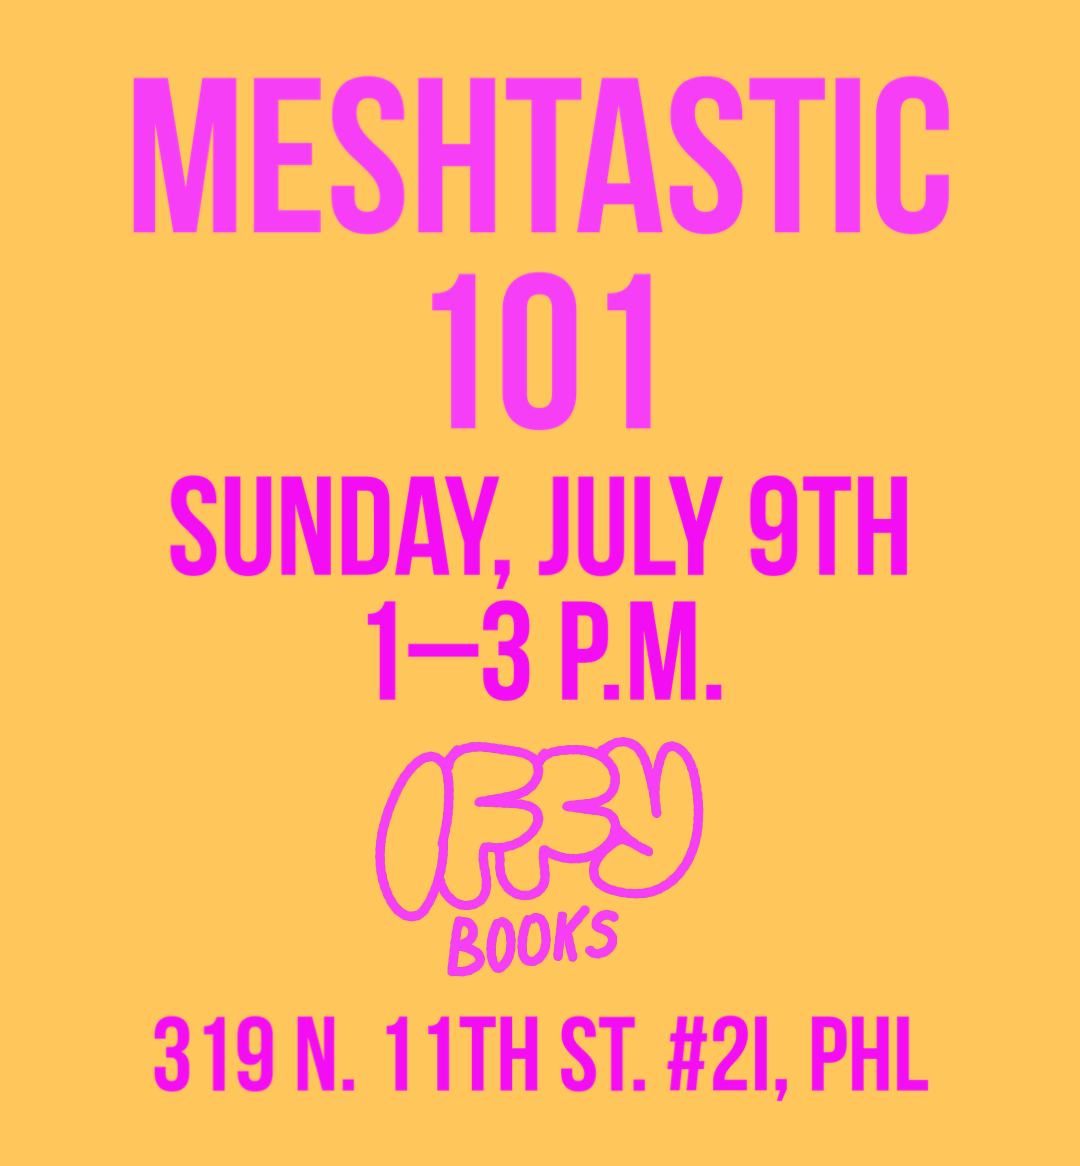 Pink text on a yellow background: Meshtastic 101 / Sunday, July 9th / 1–3 p.m. / Iffy Books / 319 N. 11th St. #2I, PHL